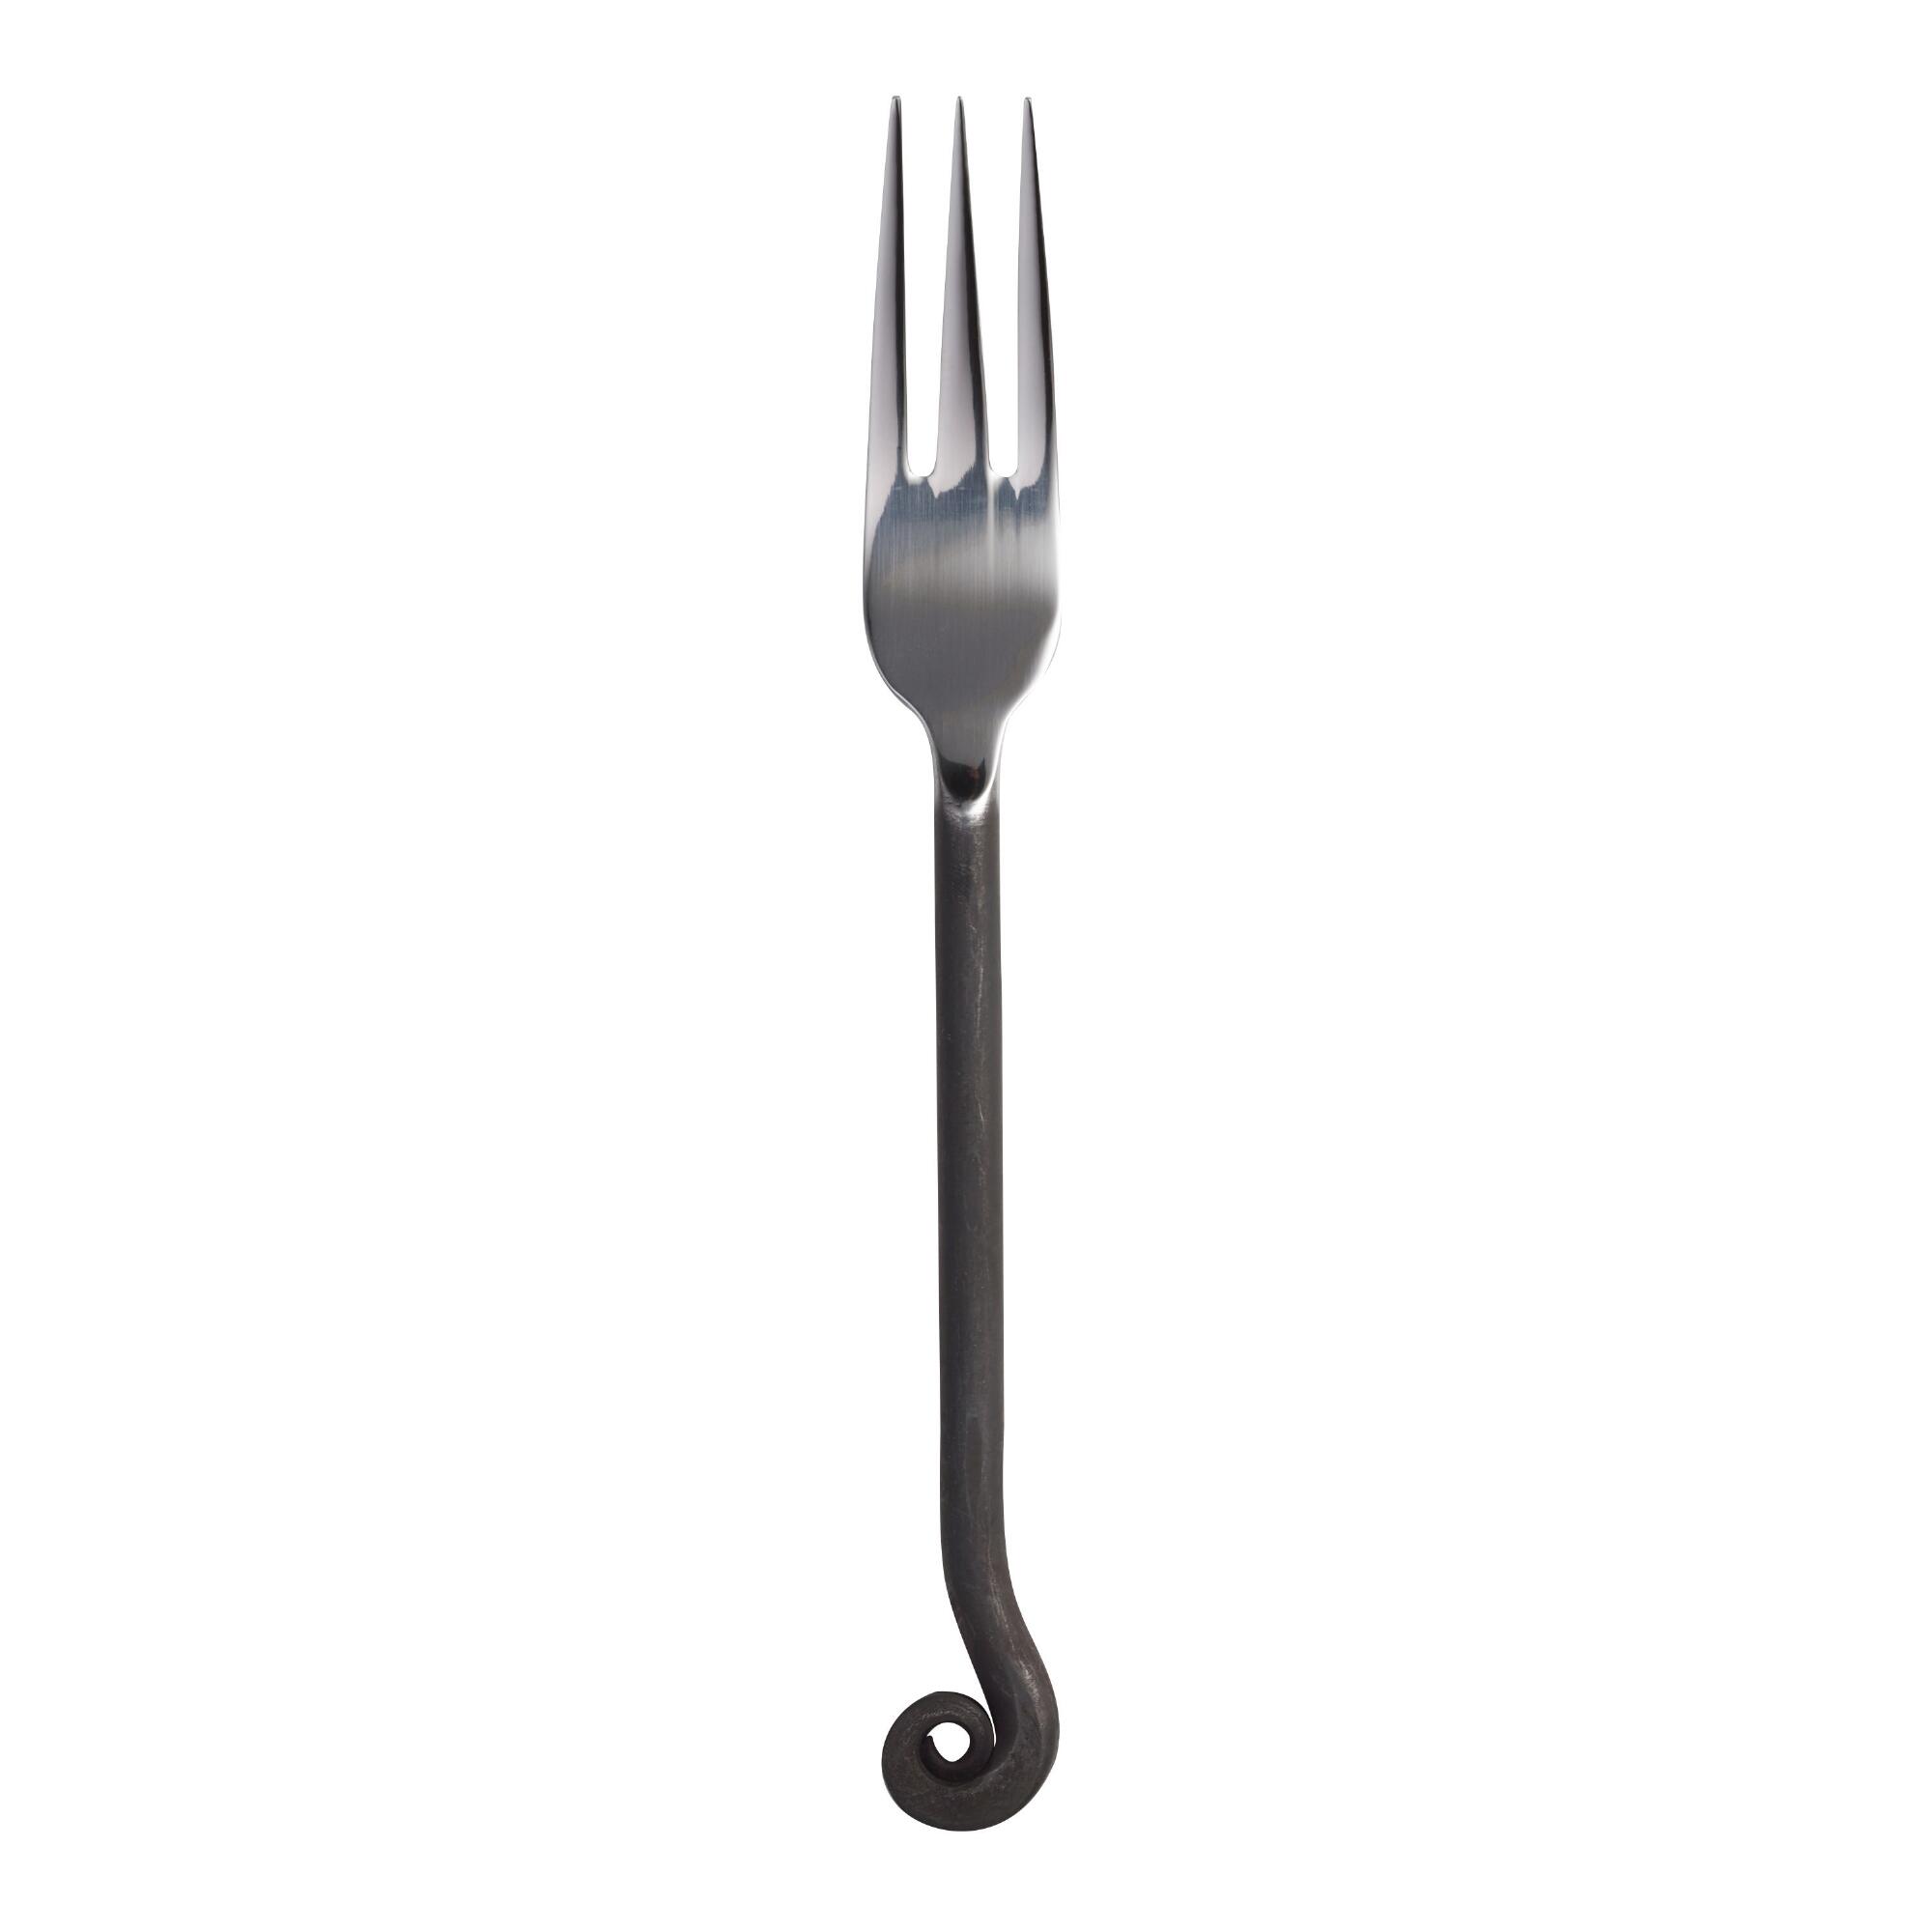 Treble Clef Dinner Forks Set of 4: Silver - Stainless Steel by World Market